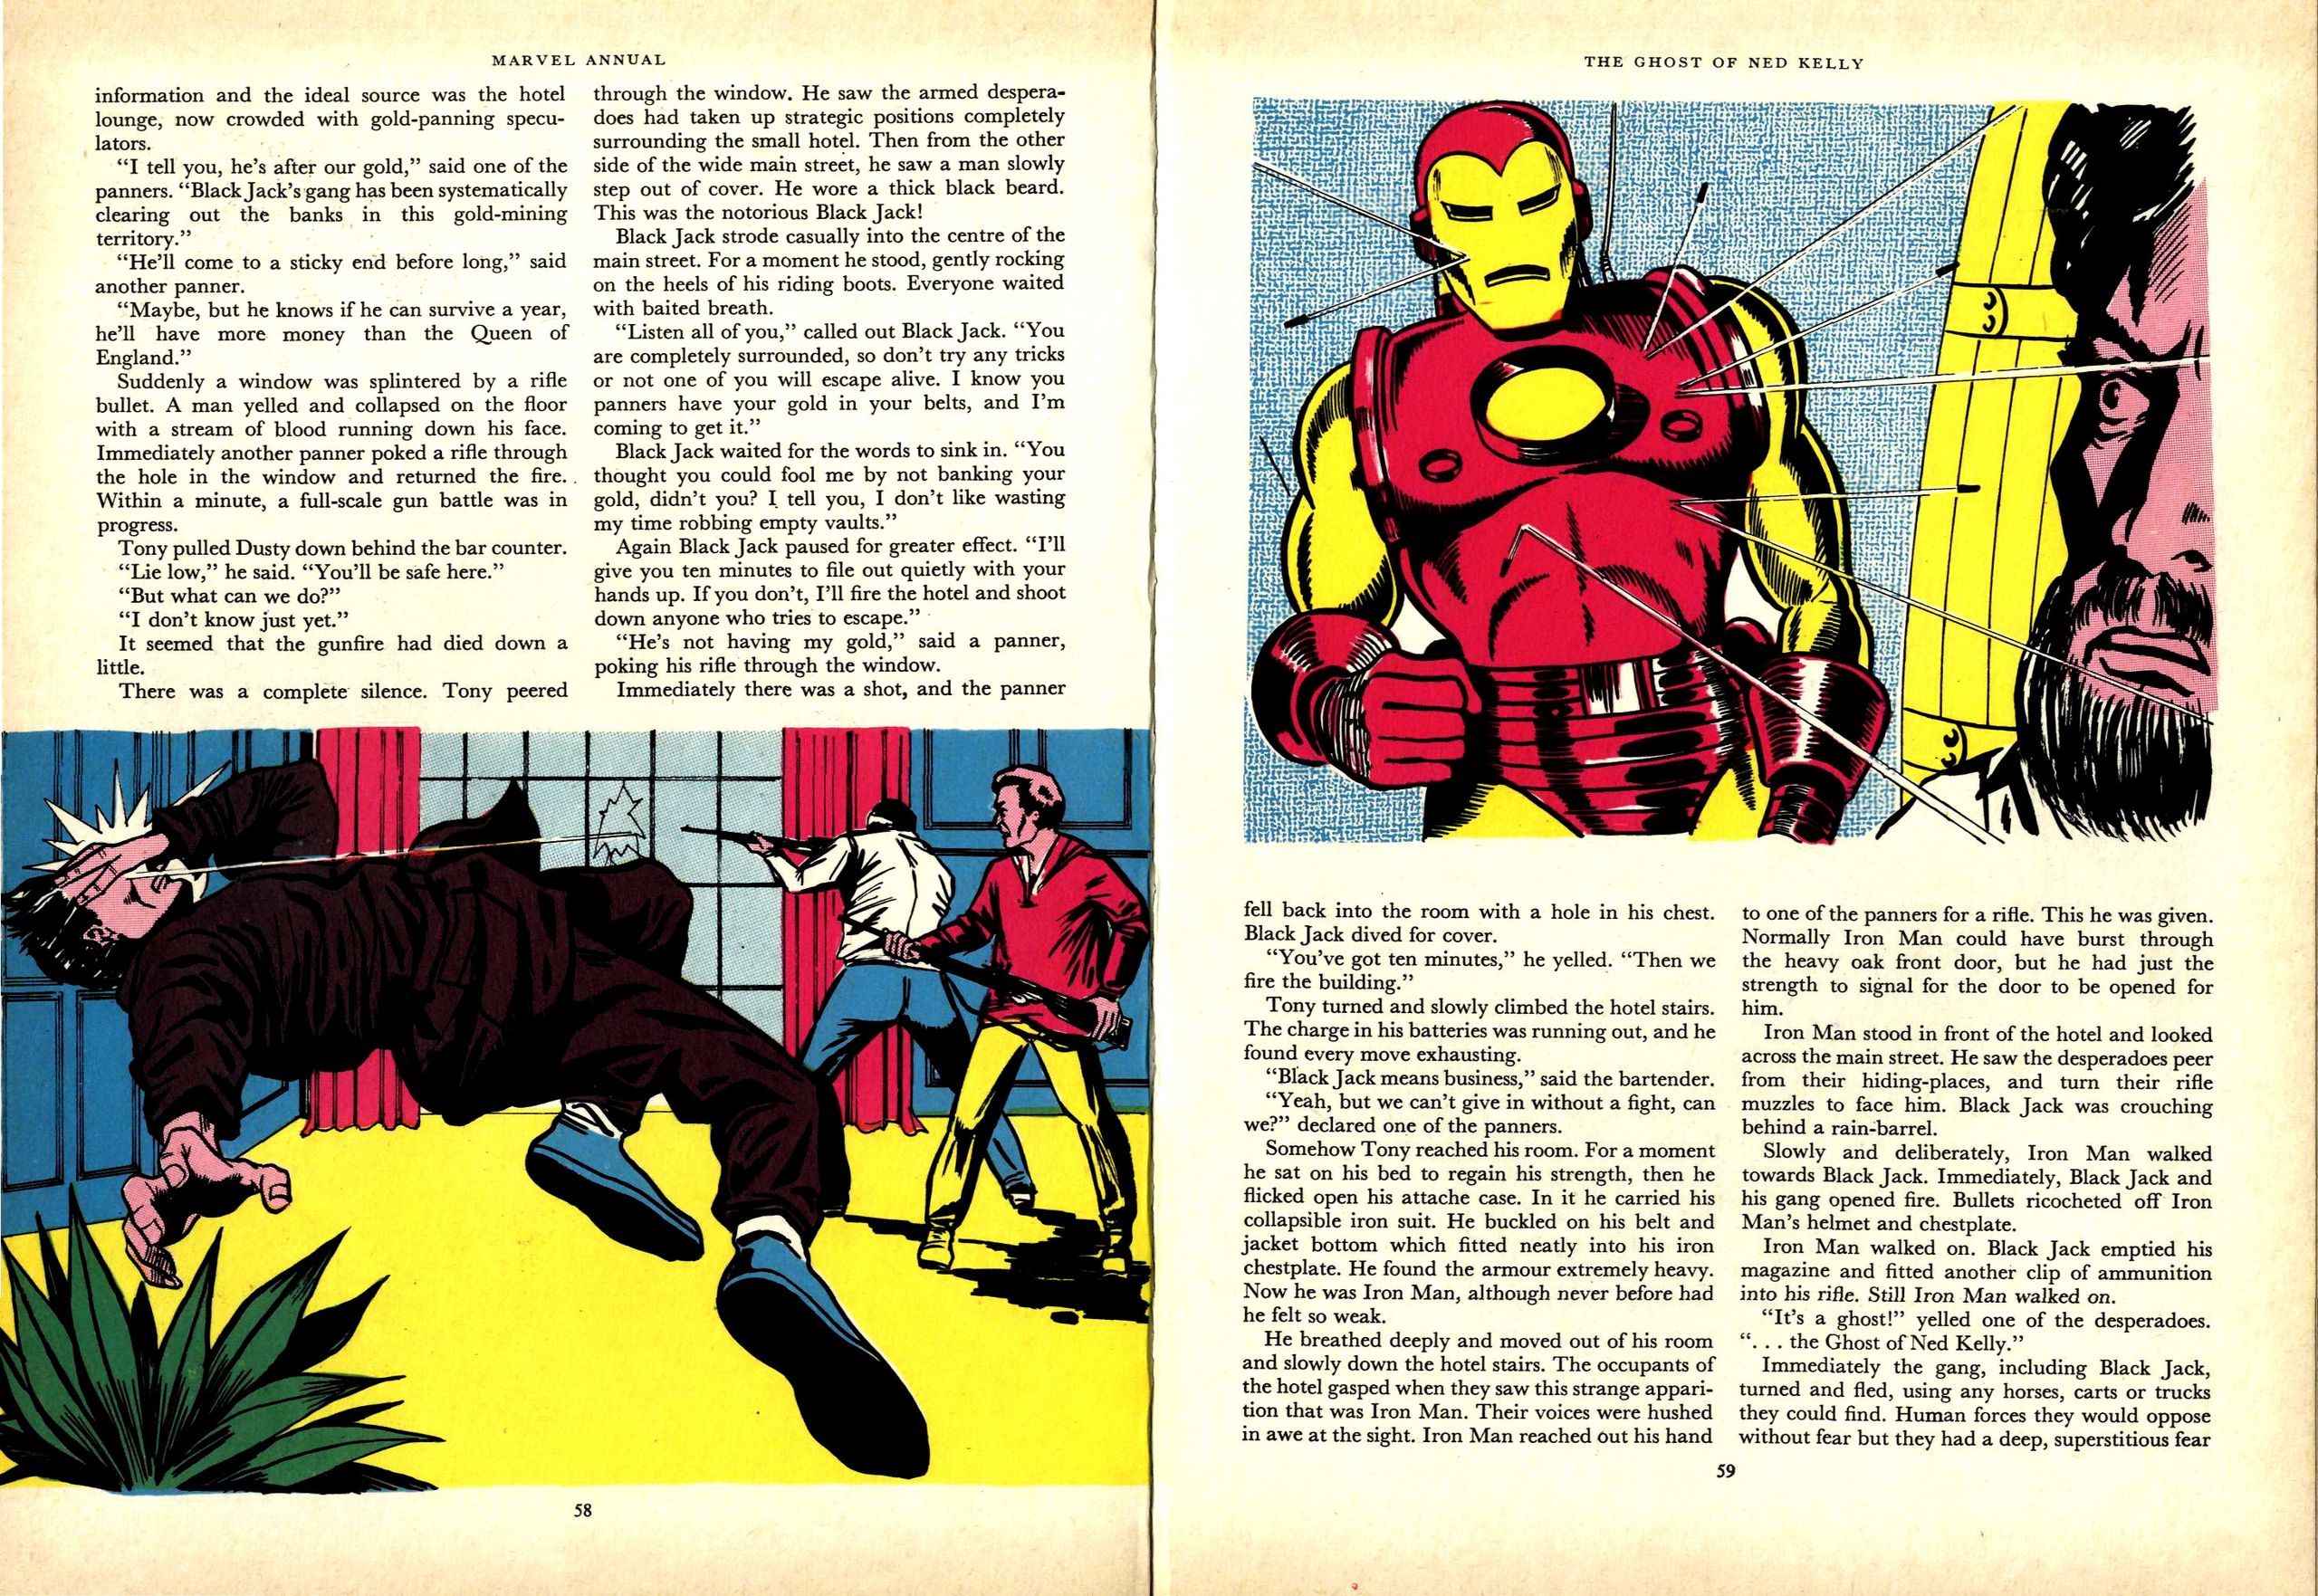 Read online Marvel Annual comic -  Issue #1967 - 30